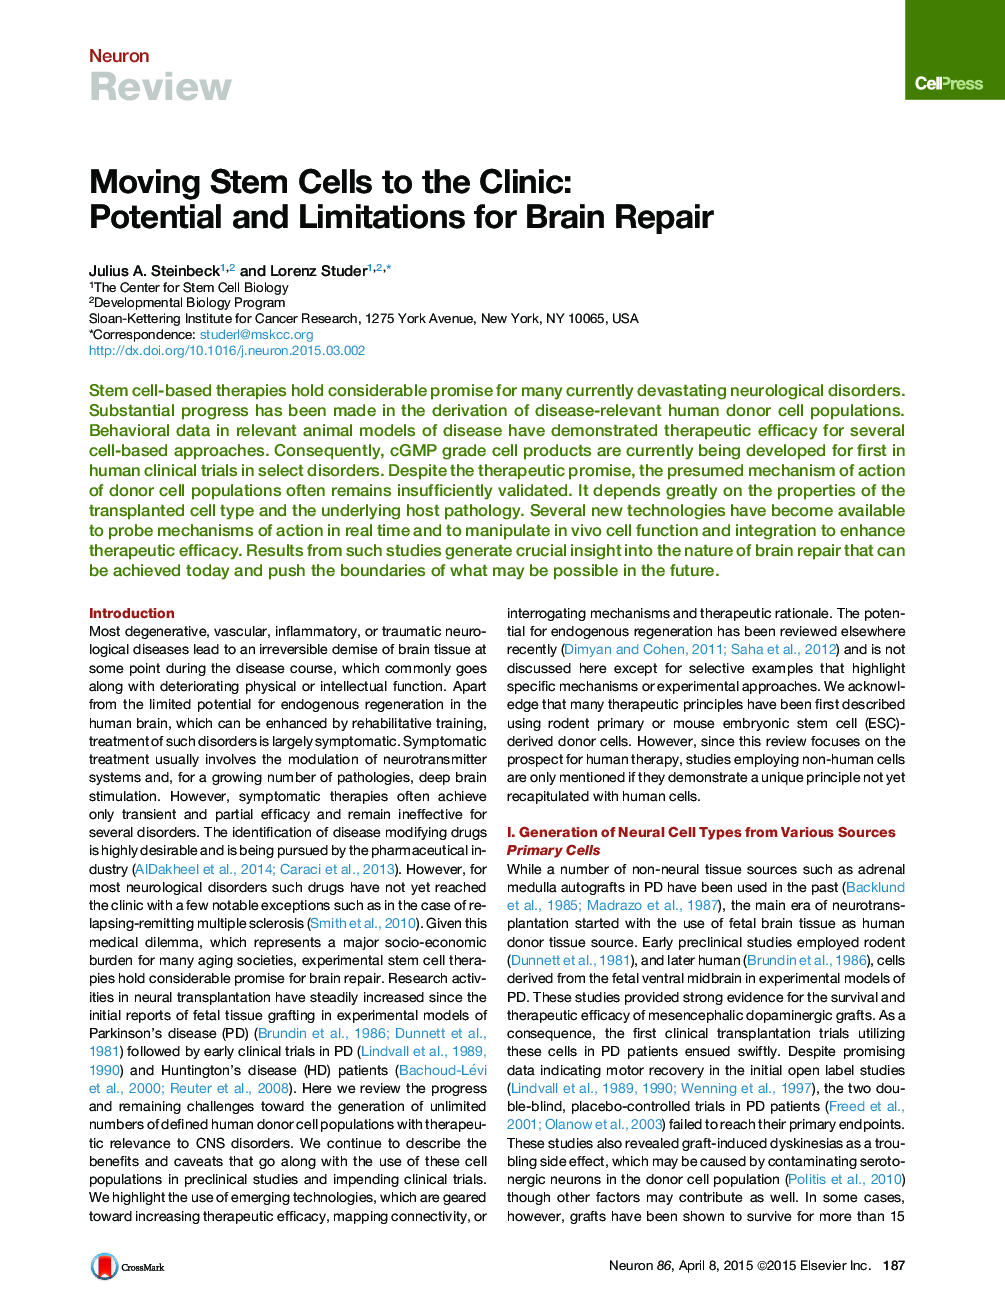 Moving Stem Cells to the Clinic: Potential and Limitations for Brain Repair